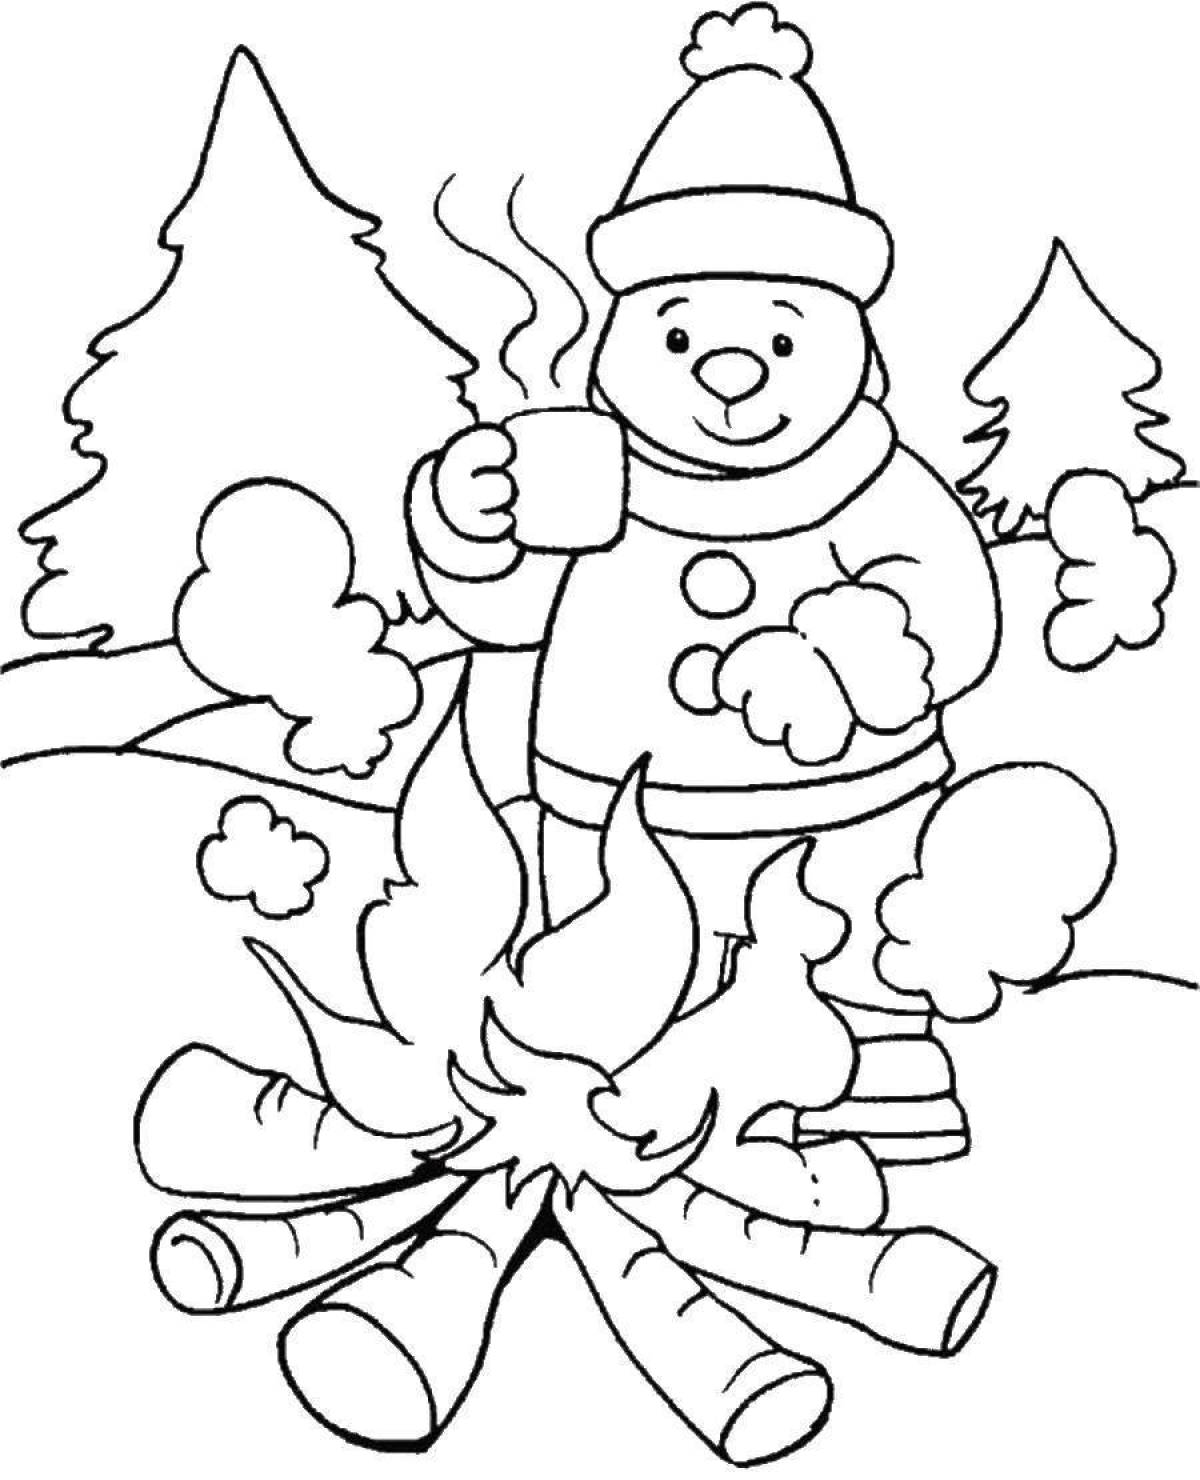 Festive winter coloring book for children 4-5 years old